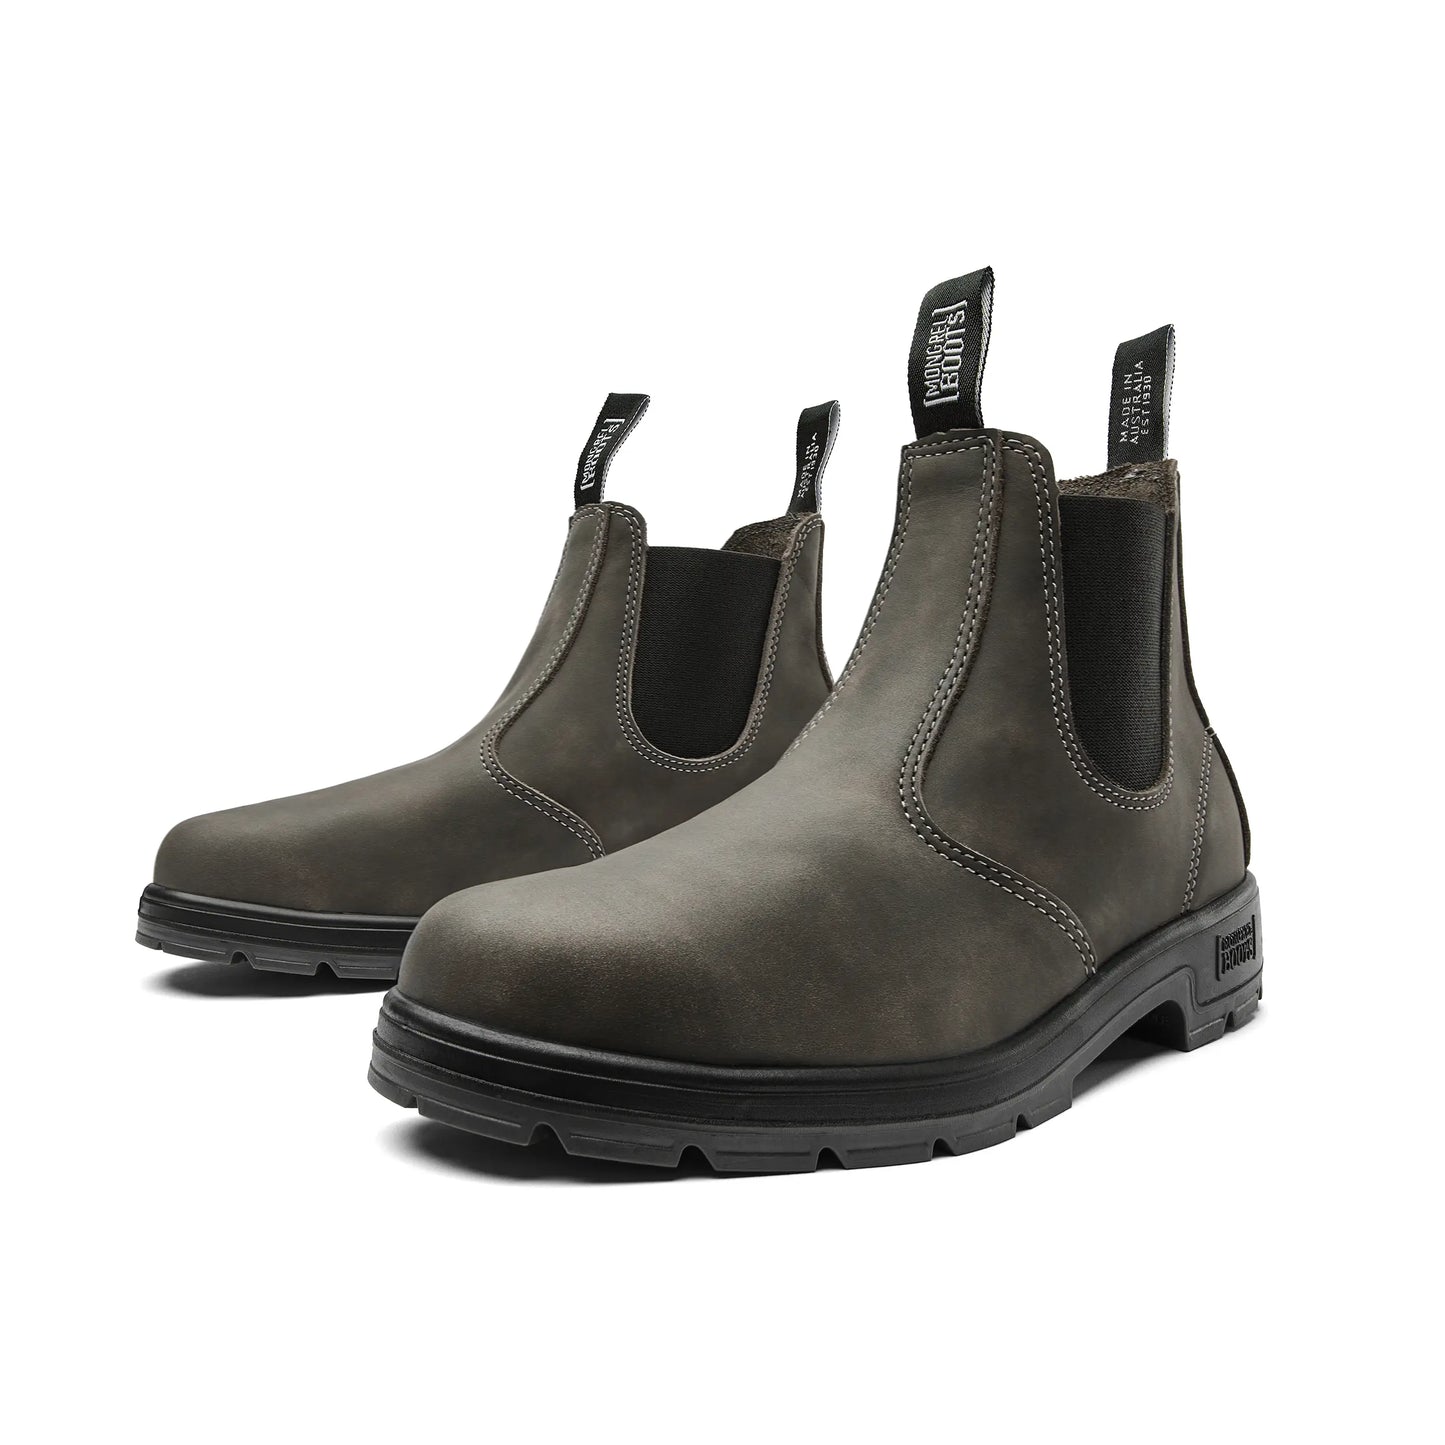 Mongrel Cloudy grey Elastic sided boot (K91085)